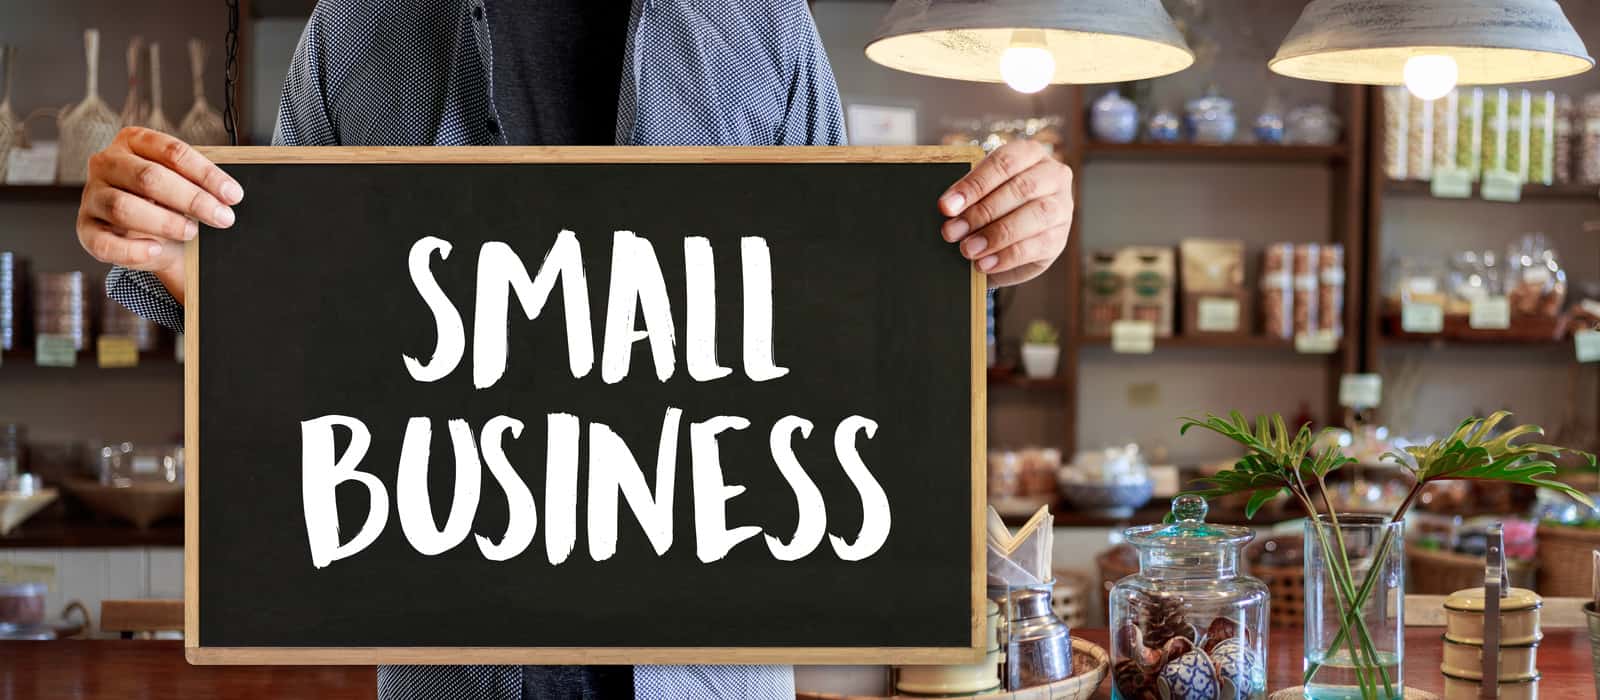  Small Business Toolkit 8 Steps To Small Business Success In Canada